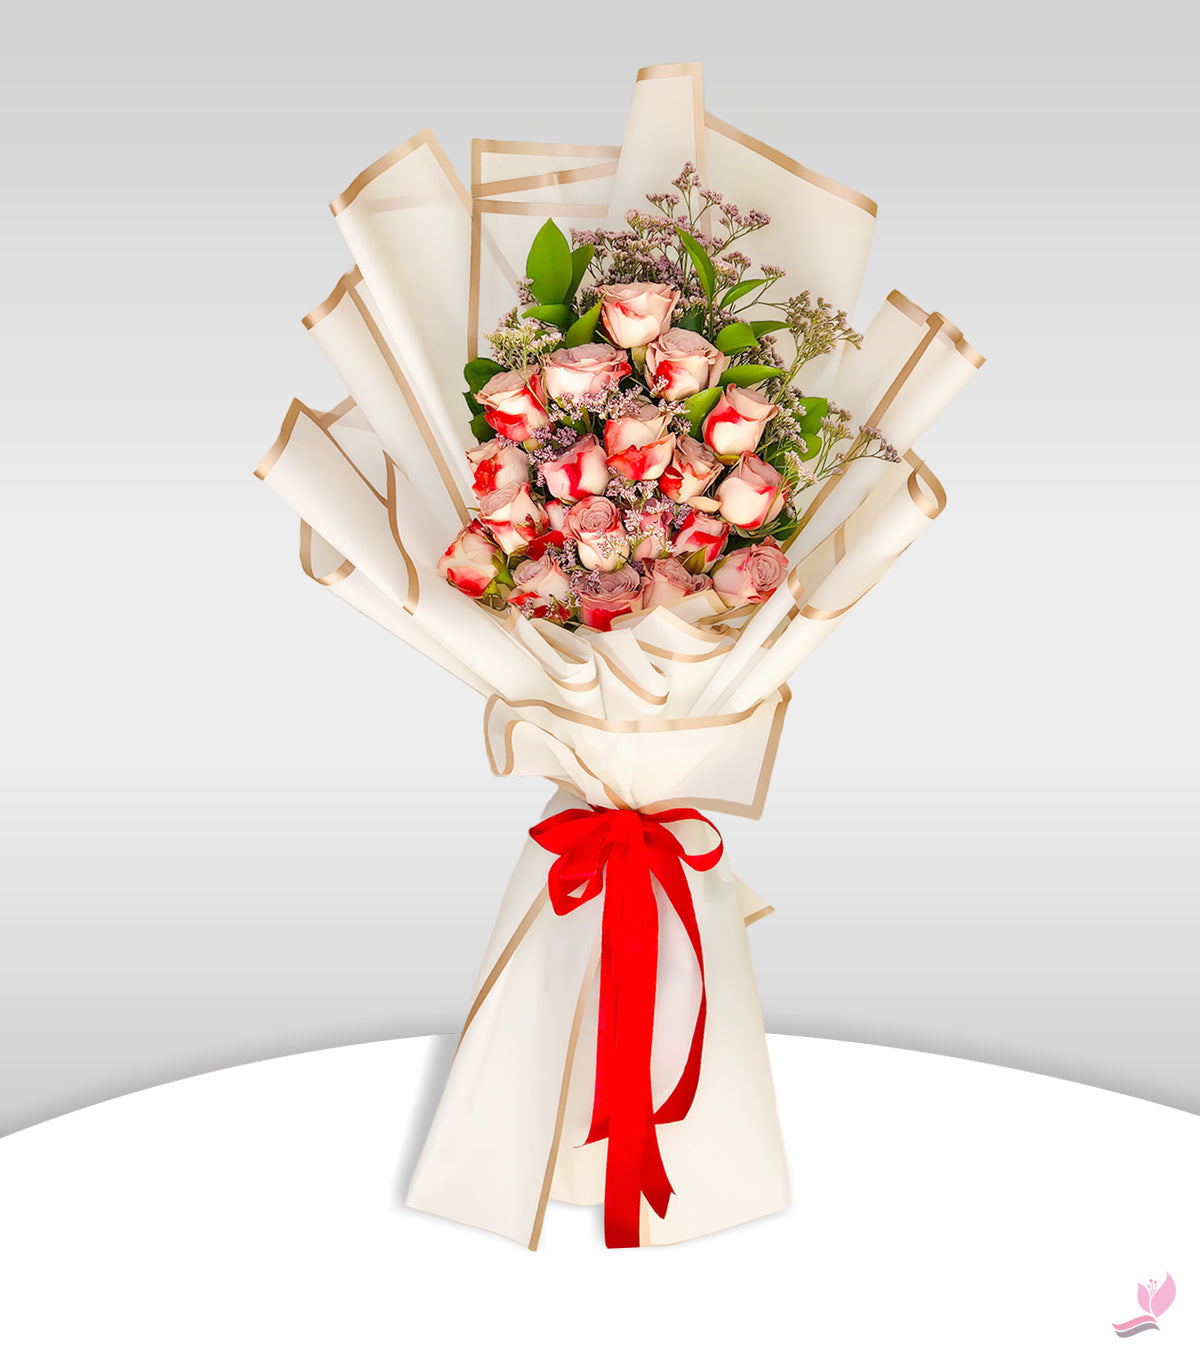 Double Dream - Arabianblossom - 20 stems - Bouquet of Lilies and Pink Roses